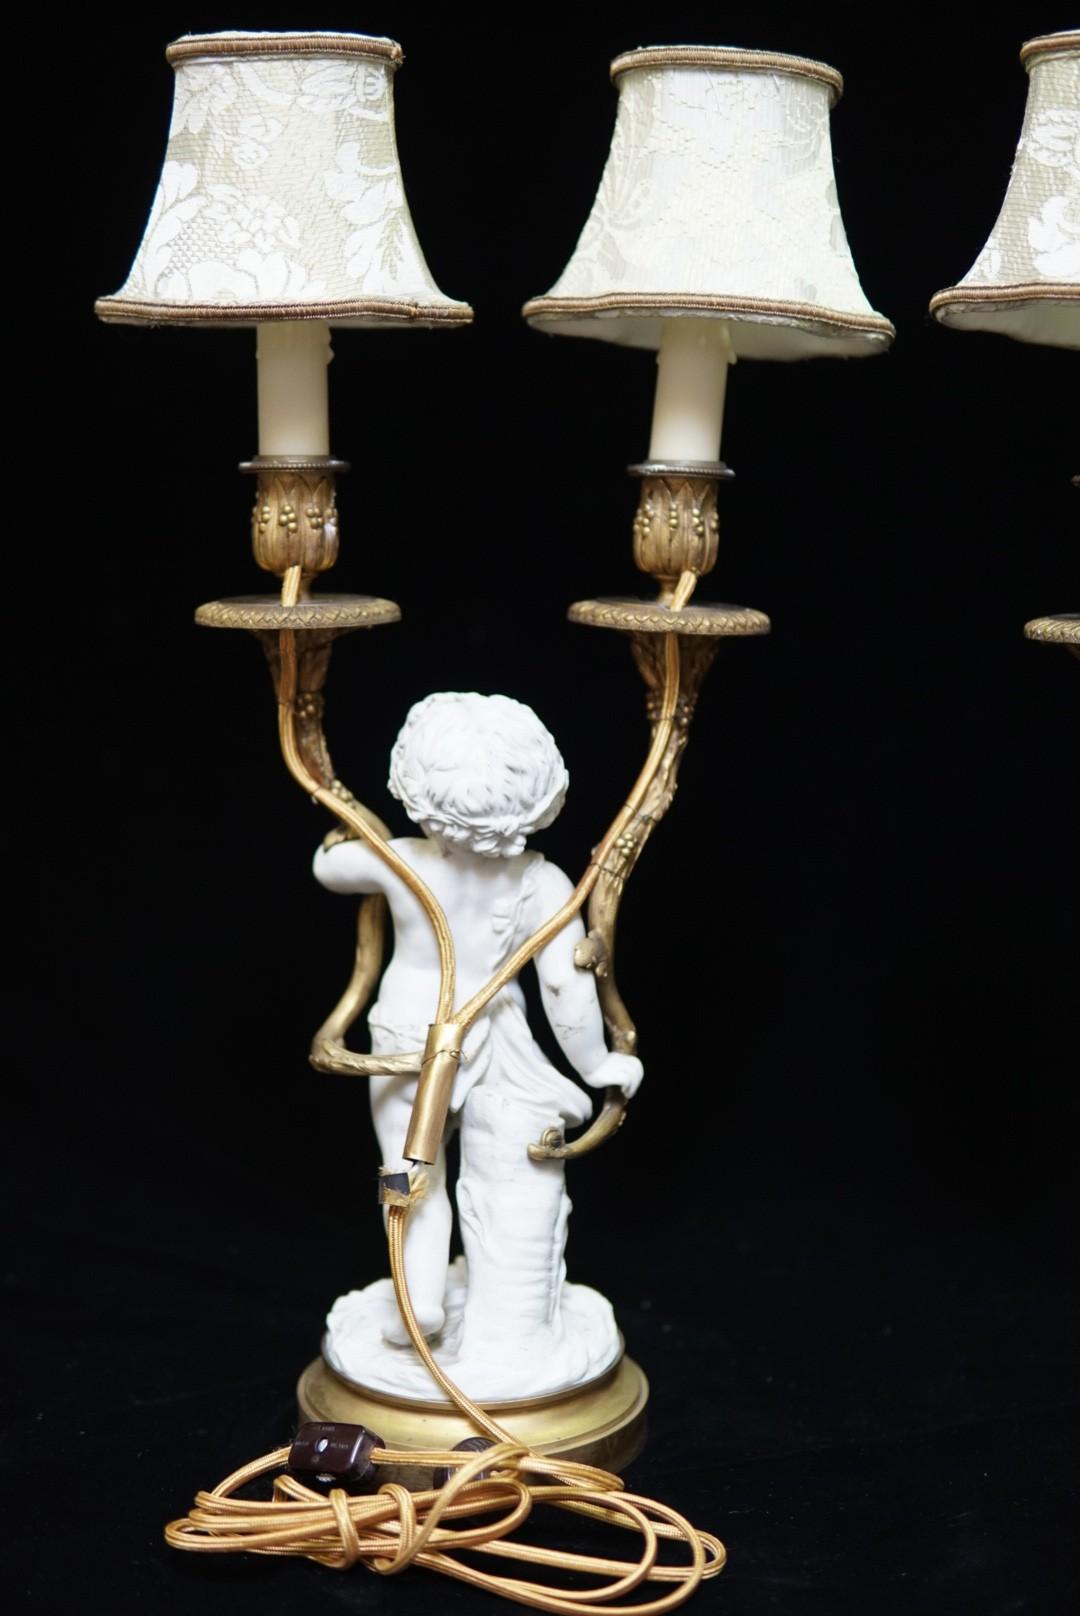 19th Century Pair of French White Porcelain and Ormolu Lamps, 19 Century For Sale